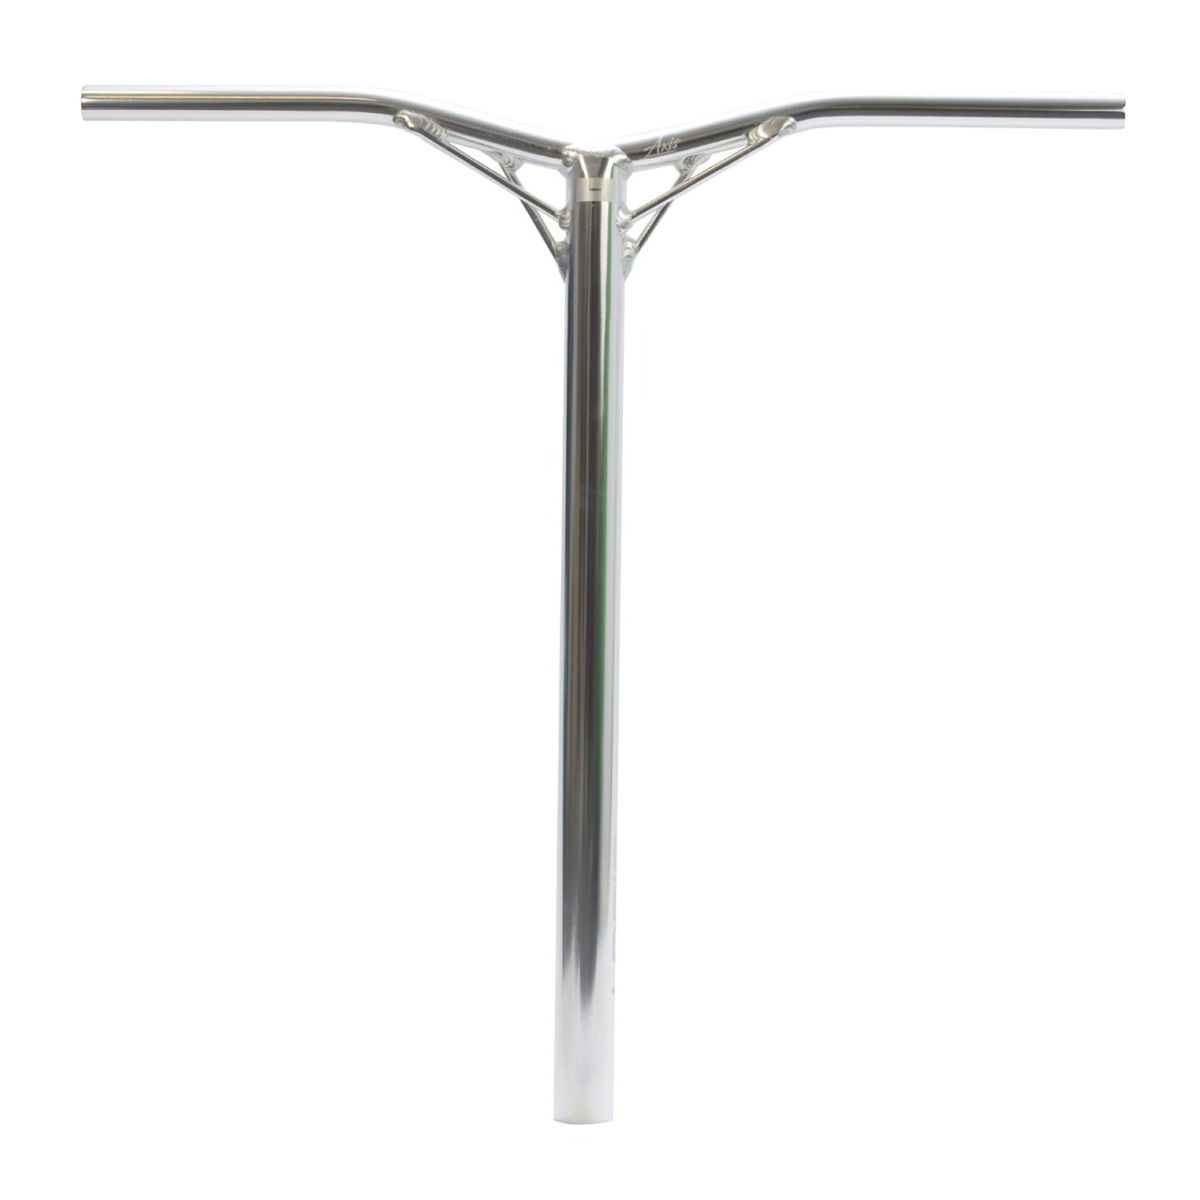 An image of Logic Axis V2 SCS / IHC Aluminium Scooter Bars - Chrome Silver- 610mm x 610mm